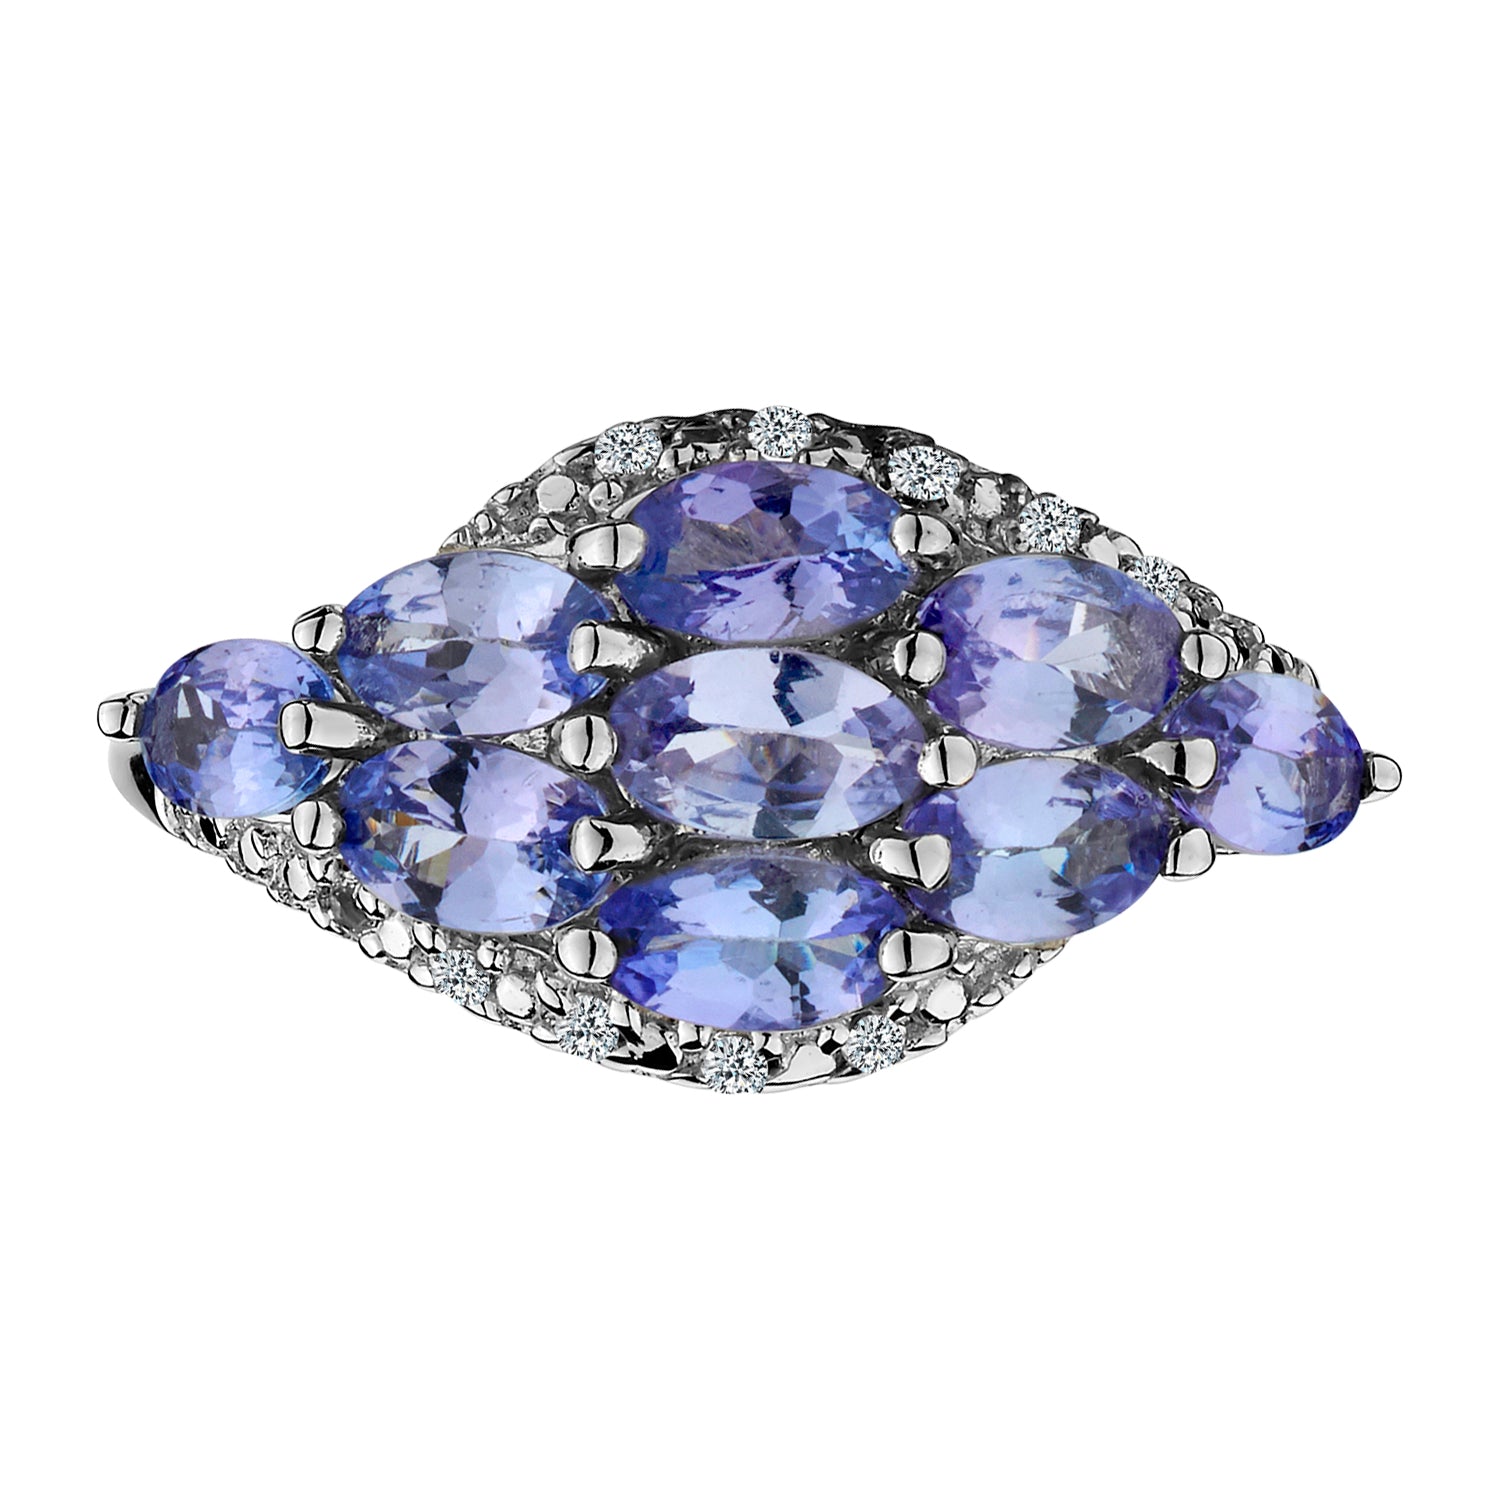 Genuine Tanzanite with White Topaz Ring,  Sterling Silver. Gemstone Rings. Griffin Jewellery Designs